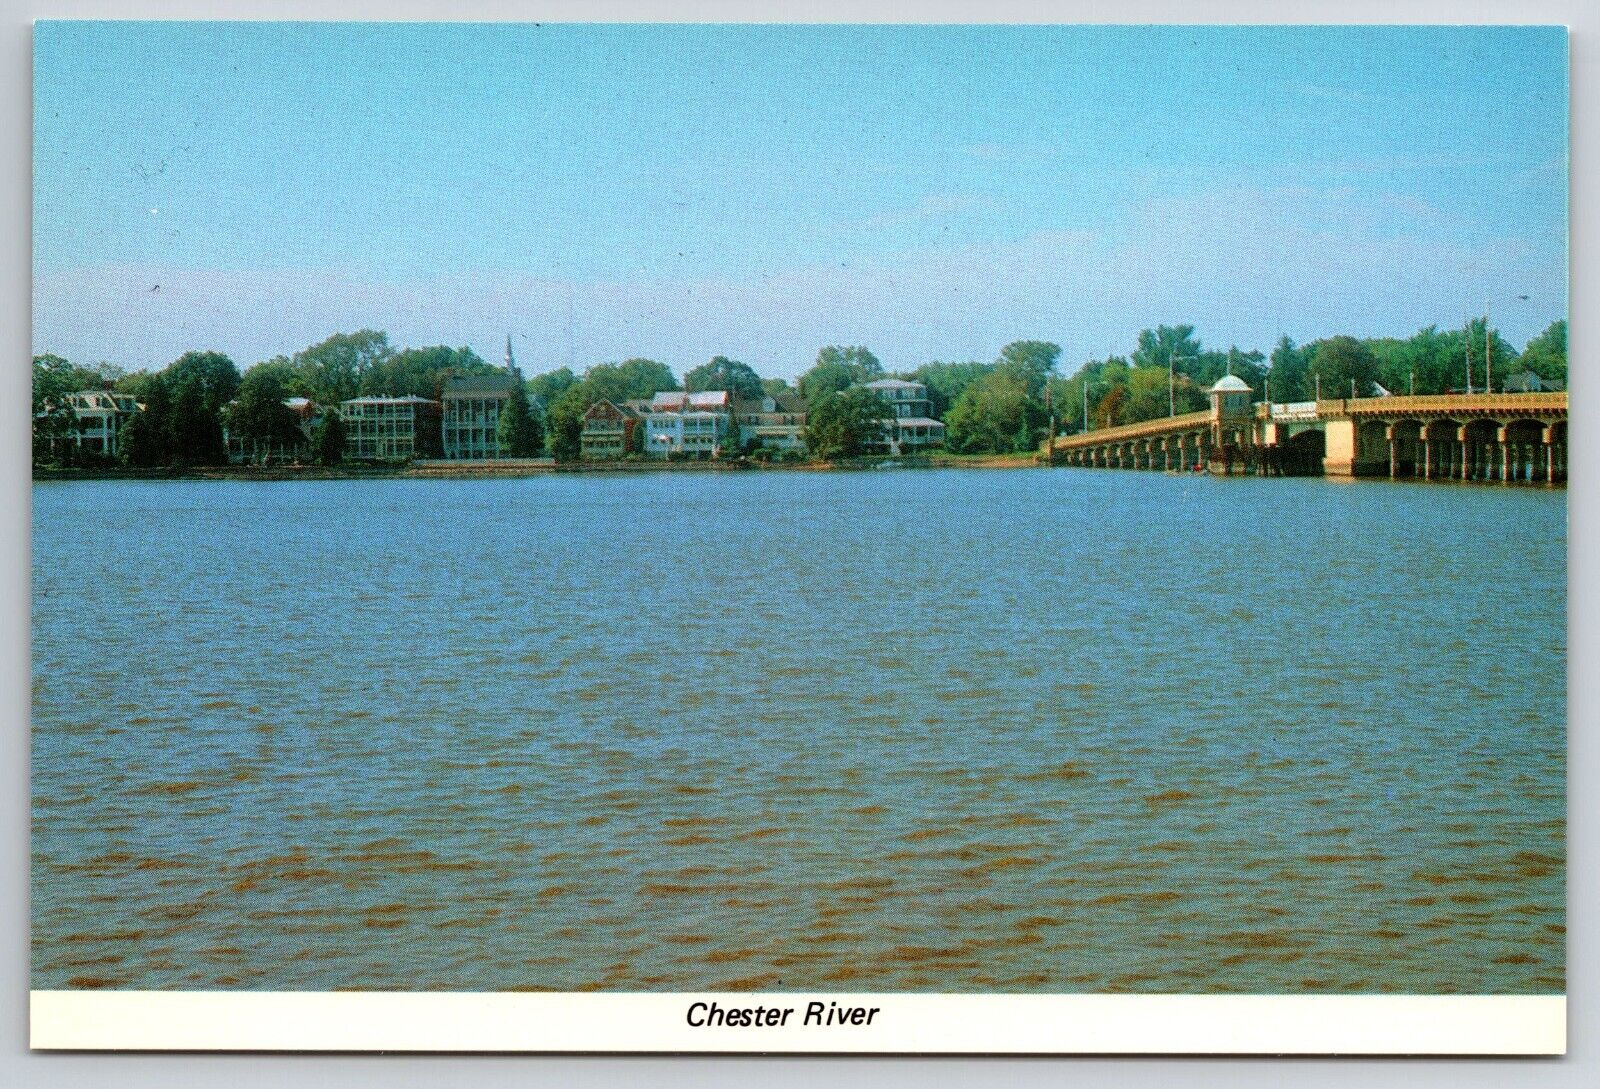 Chester River View toward Chestertown, Maryland Postcard CO-0227